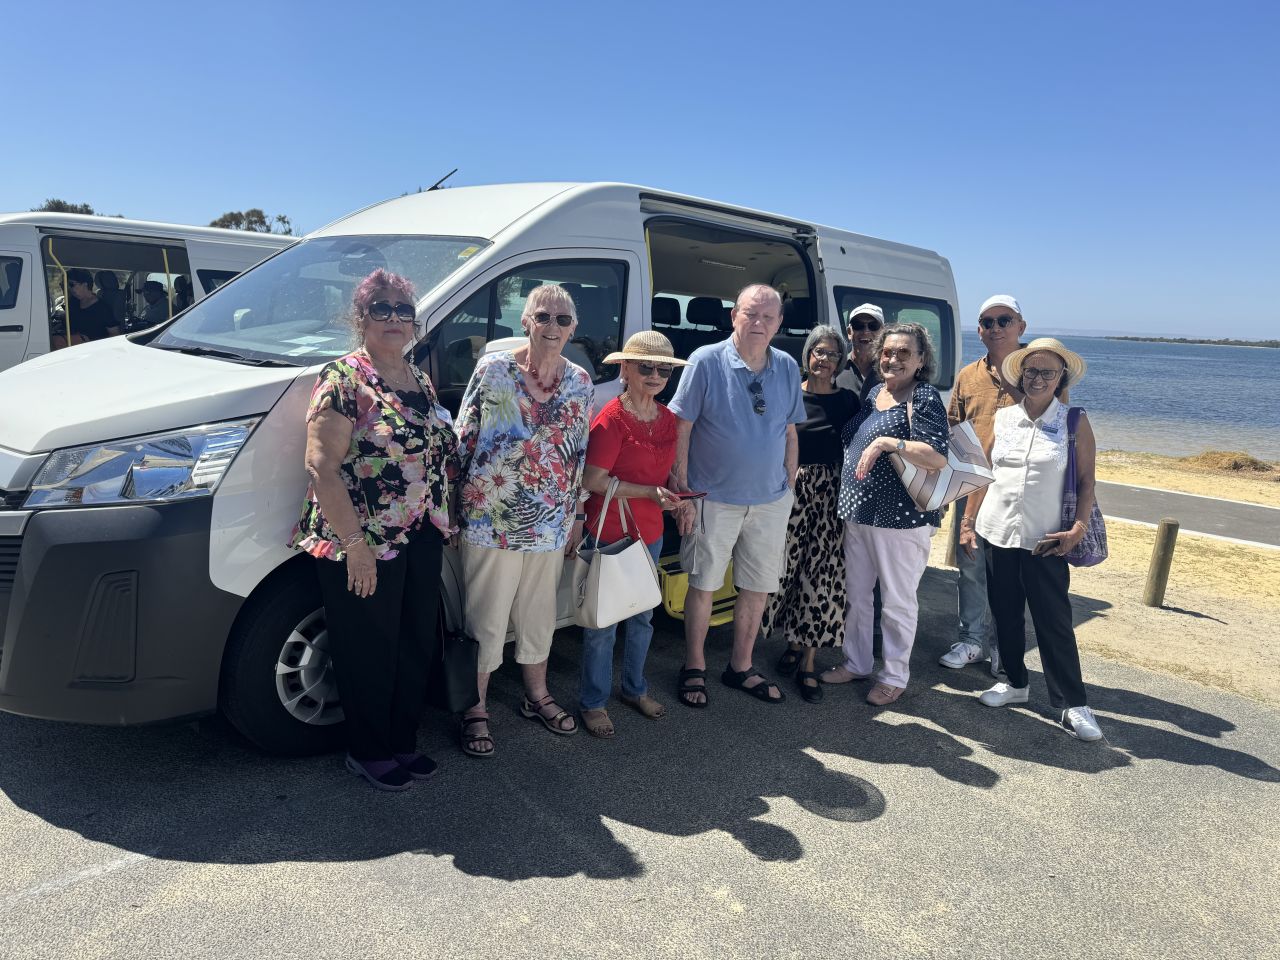 Perth Members with their bus at Seba the Song Giant from L-R Mina Crasto, Elizabeth Simionato, Terri and Rod MacLaren, Melanie Fonseca, Philip Goes, Genie Bristowe, Lawrence Minus (Bus Driver) and Melody Correia (Bus Leader)